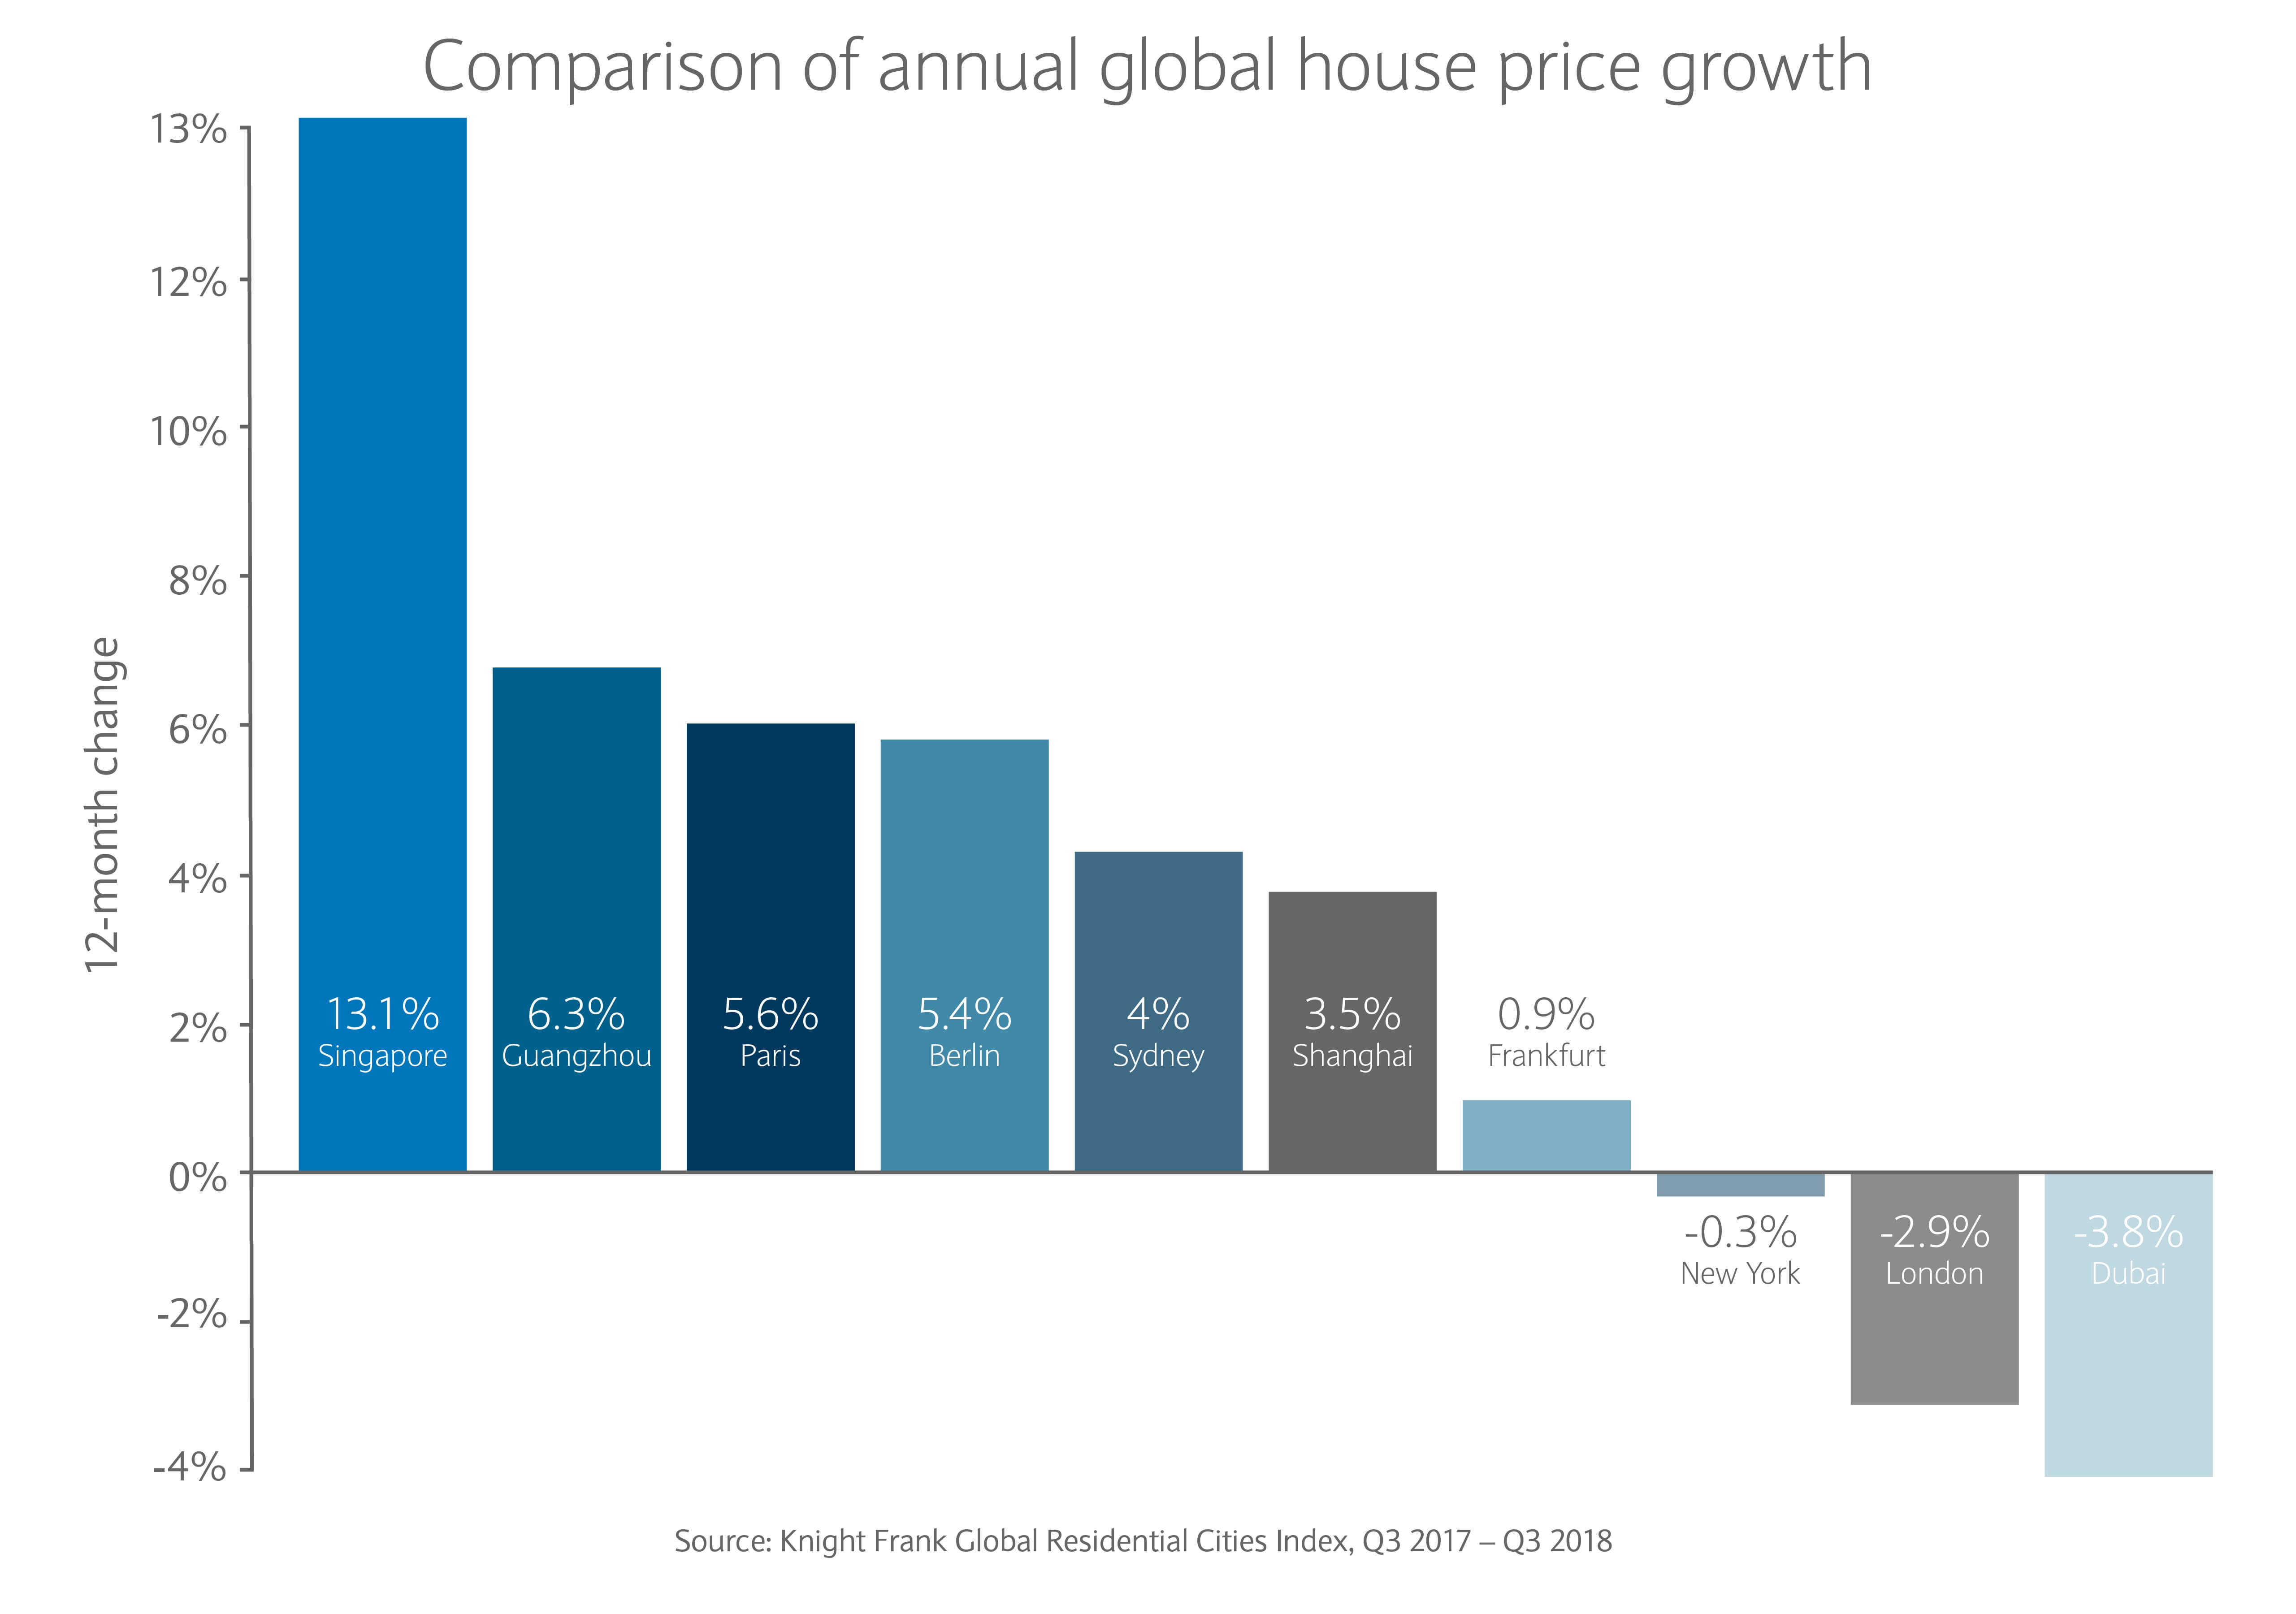 Annual global house price growth